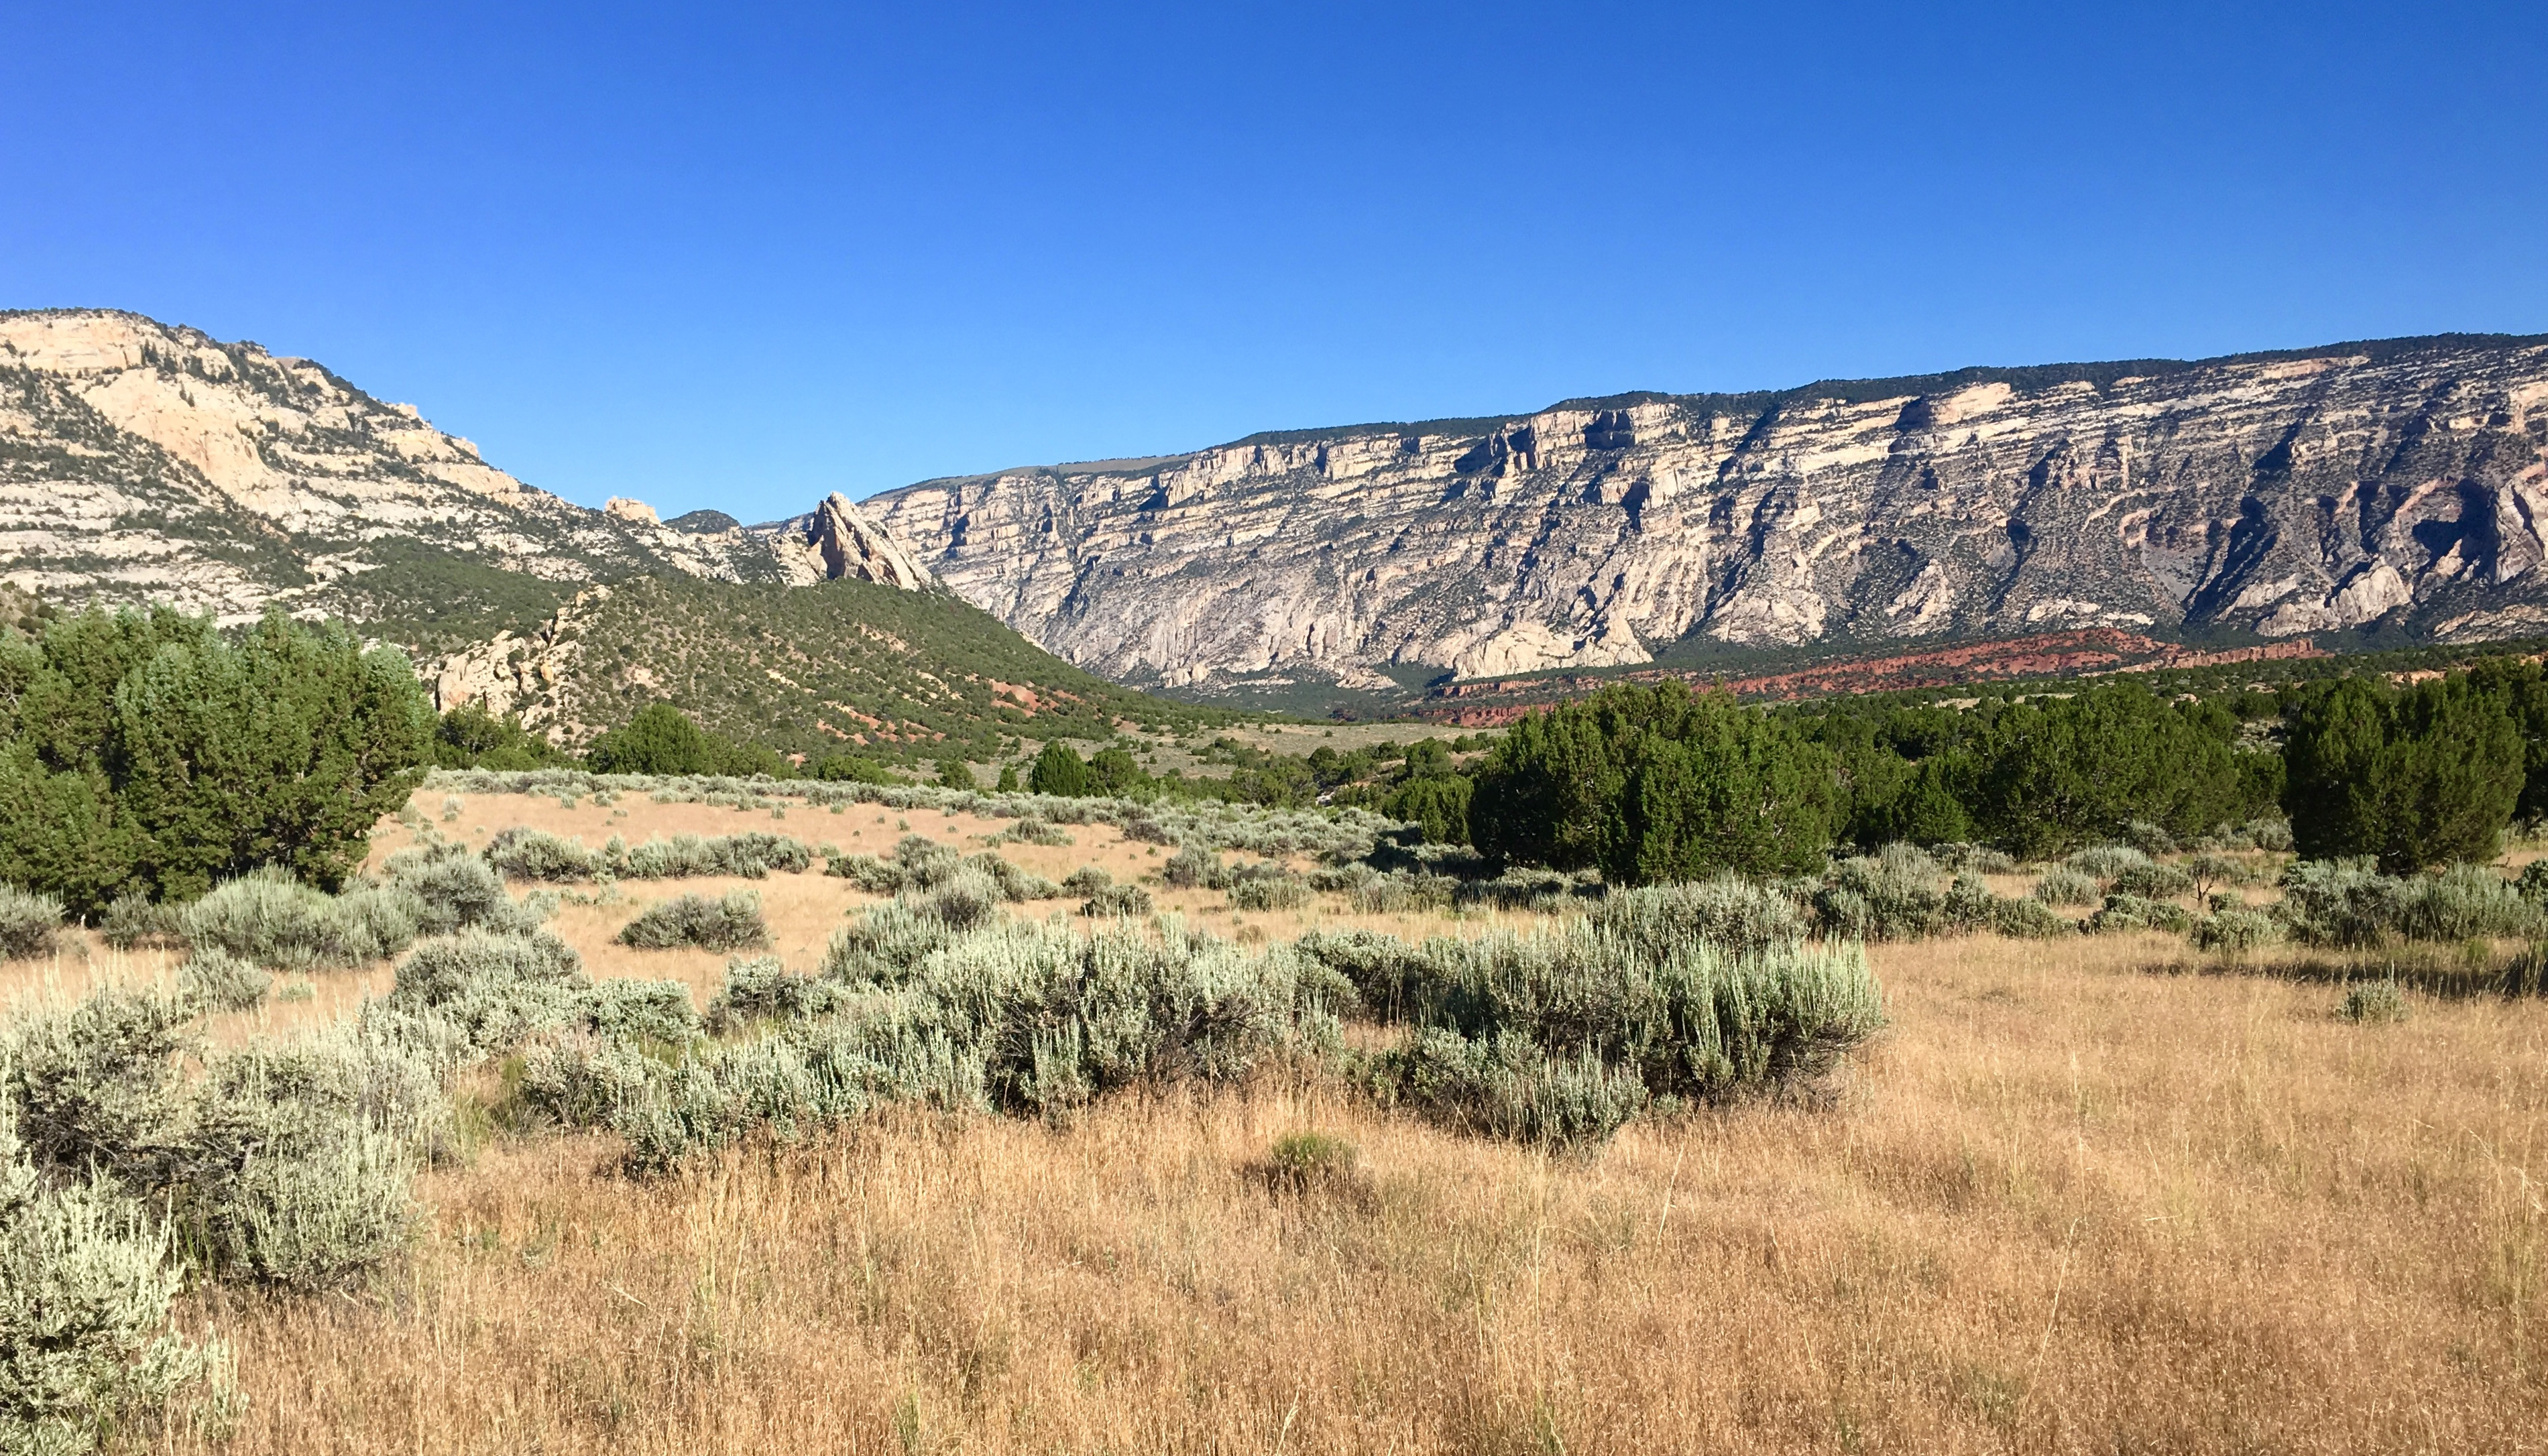 A landscape with pinyon-juniper woodlands interfacing with sagebrush communities in Dinosaur National Monument.